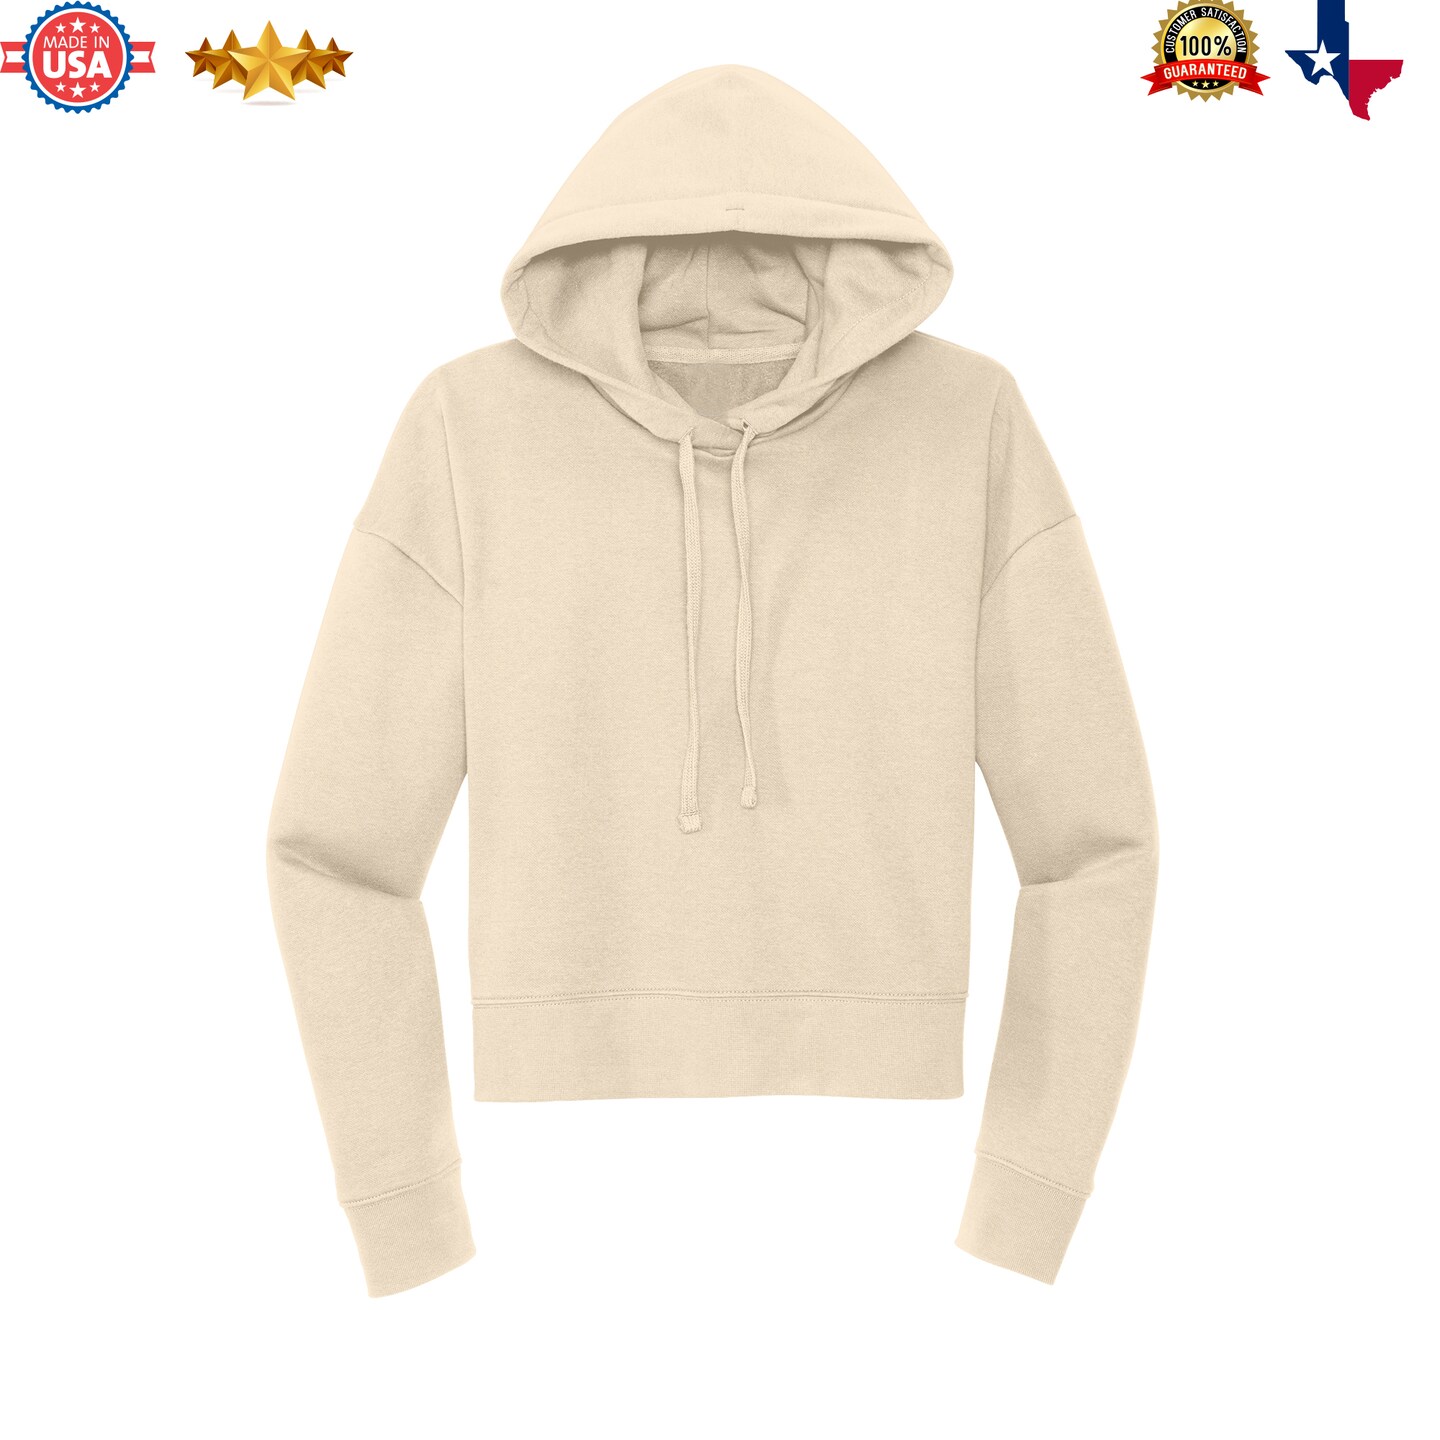 With our Fleece Hoodie-Warm, Soft, and Trendy, Comfortable, Lounge